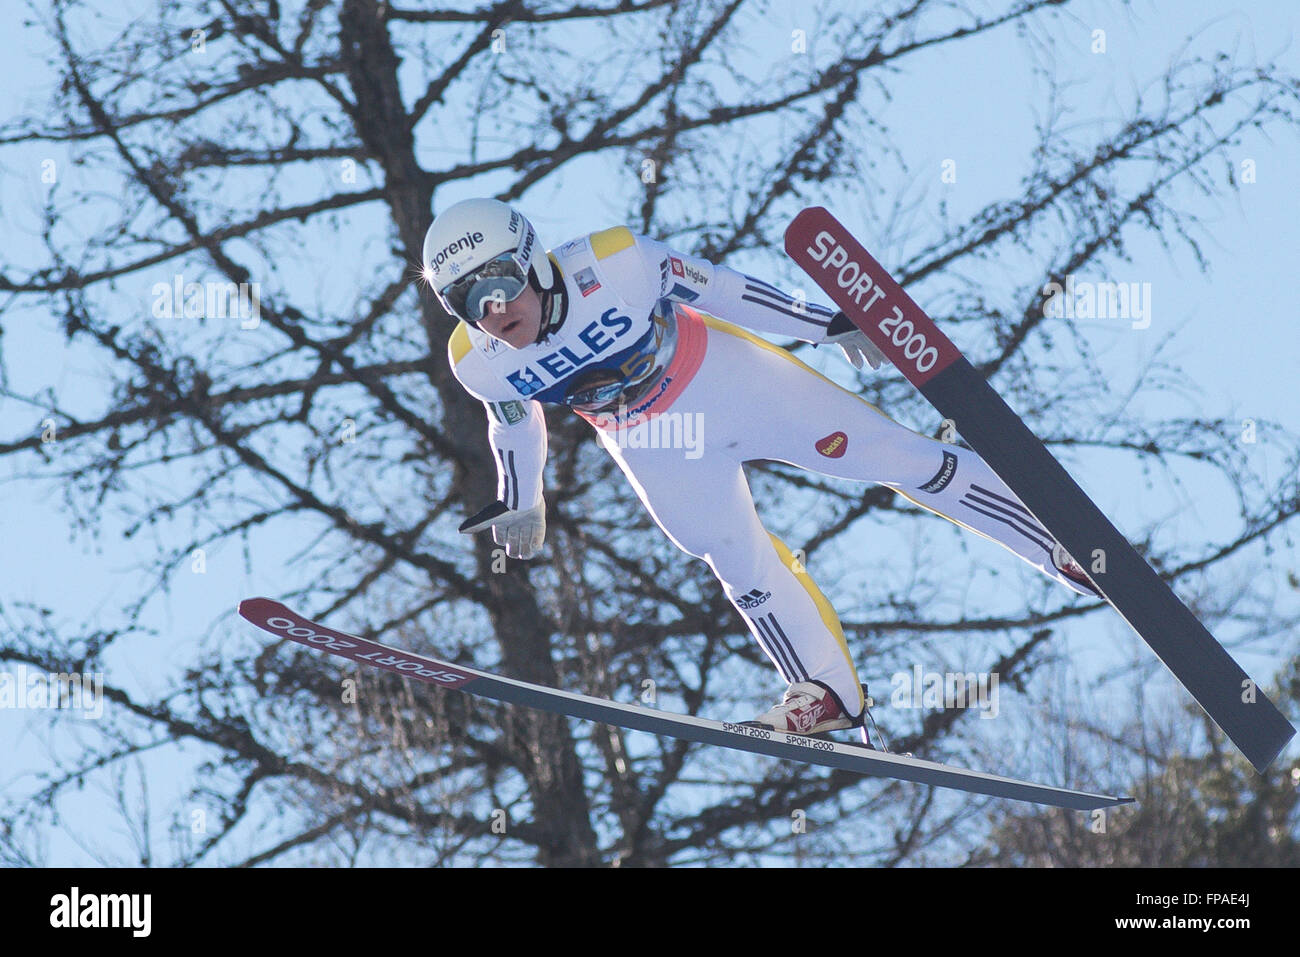 Planica, Slovenia. 18th Mar, 2016. Jurij Tepes of Slovenia competes during Planica FIS Ski Jumping World Cup final on the March 18, 2016 in Planica, Slovenia. © Rok Rakun/Pacific Press/Alamy Live News Stock Photo